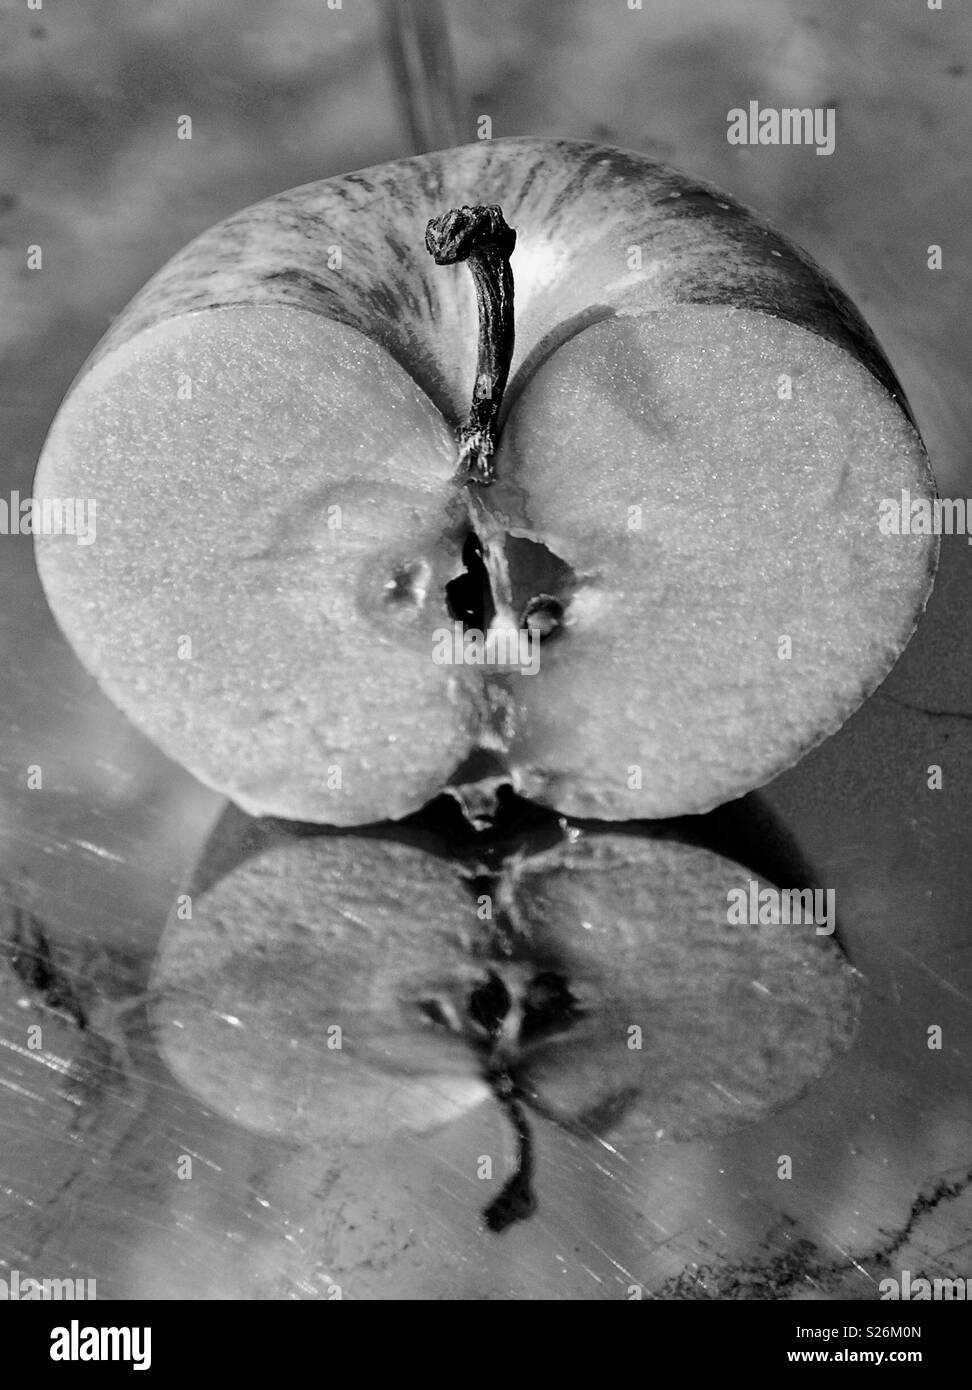 Still Life - Half an apple reflecting in stainless steel Stock Photo